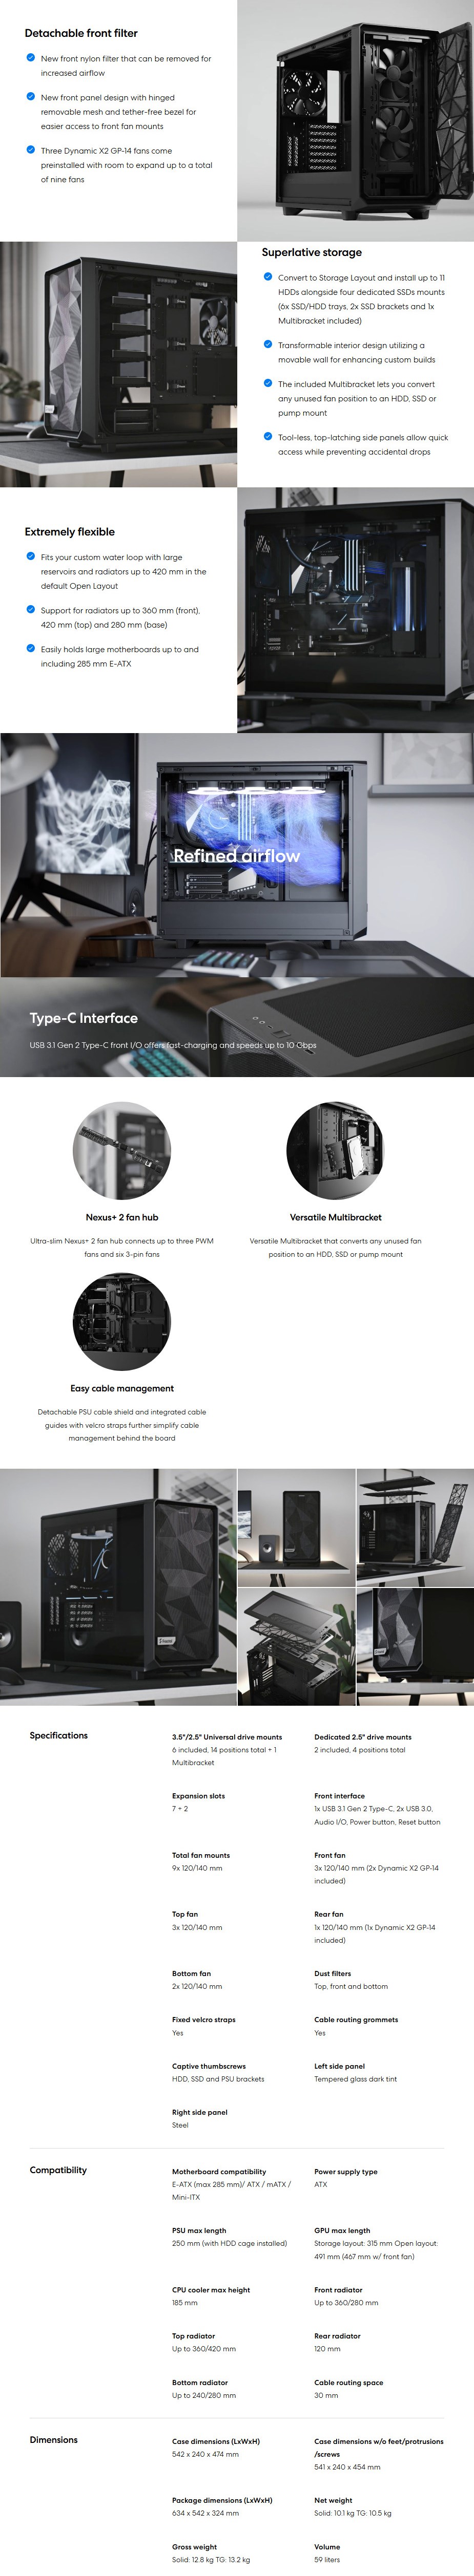 A large marketing image providing additional information about the product Fractal Design Meshify 2 TG Light Tint Mid Tower Case - Black - Additional alt info not provided